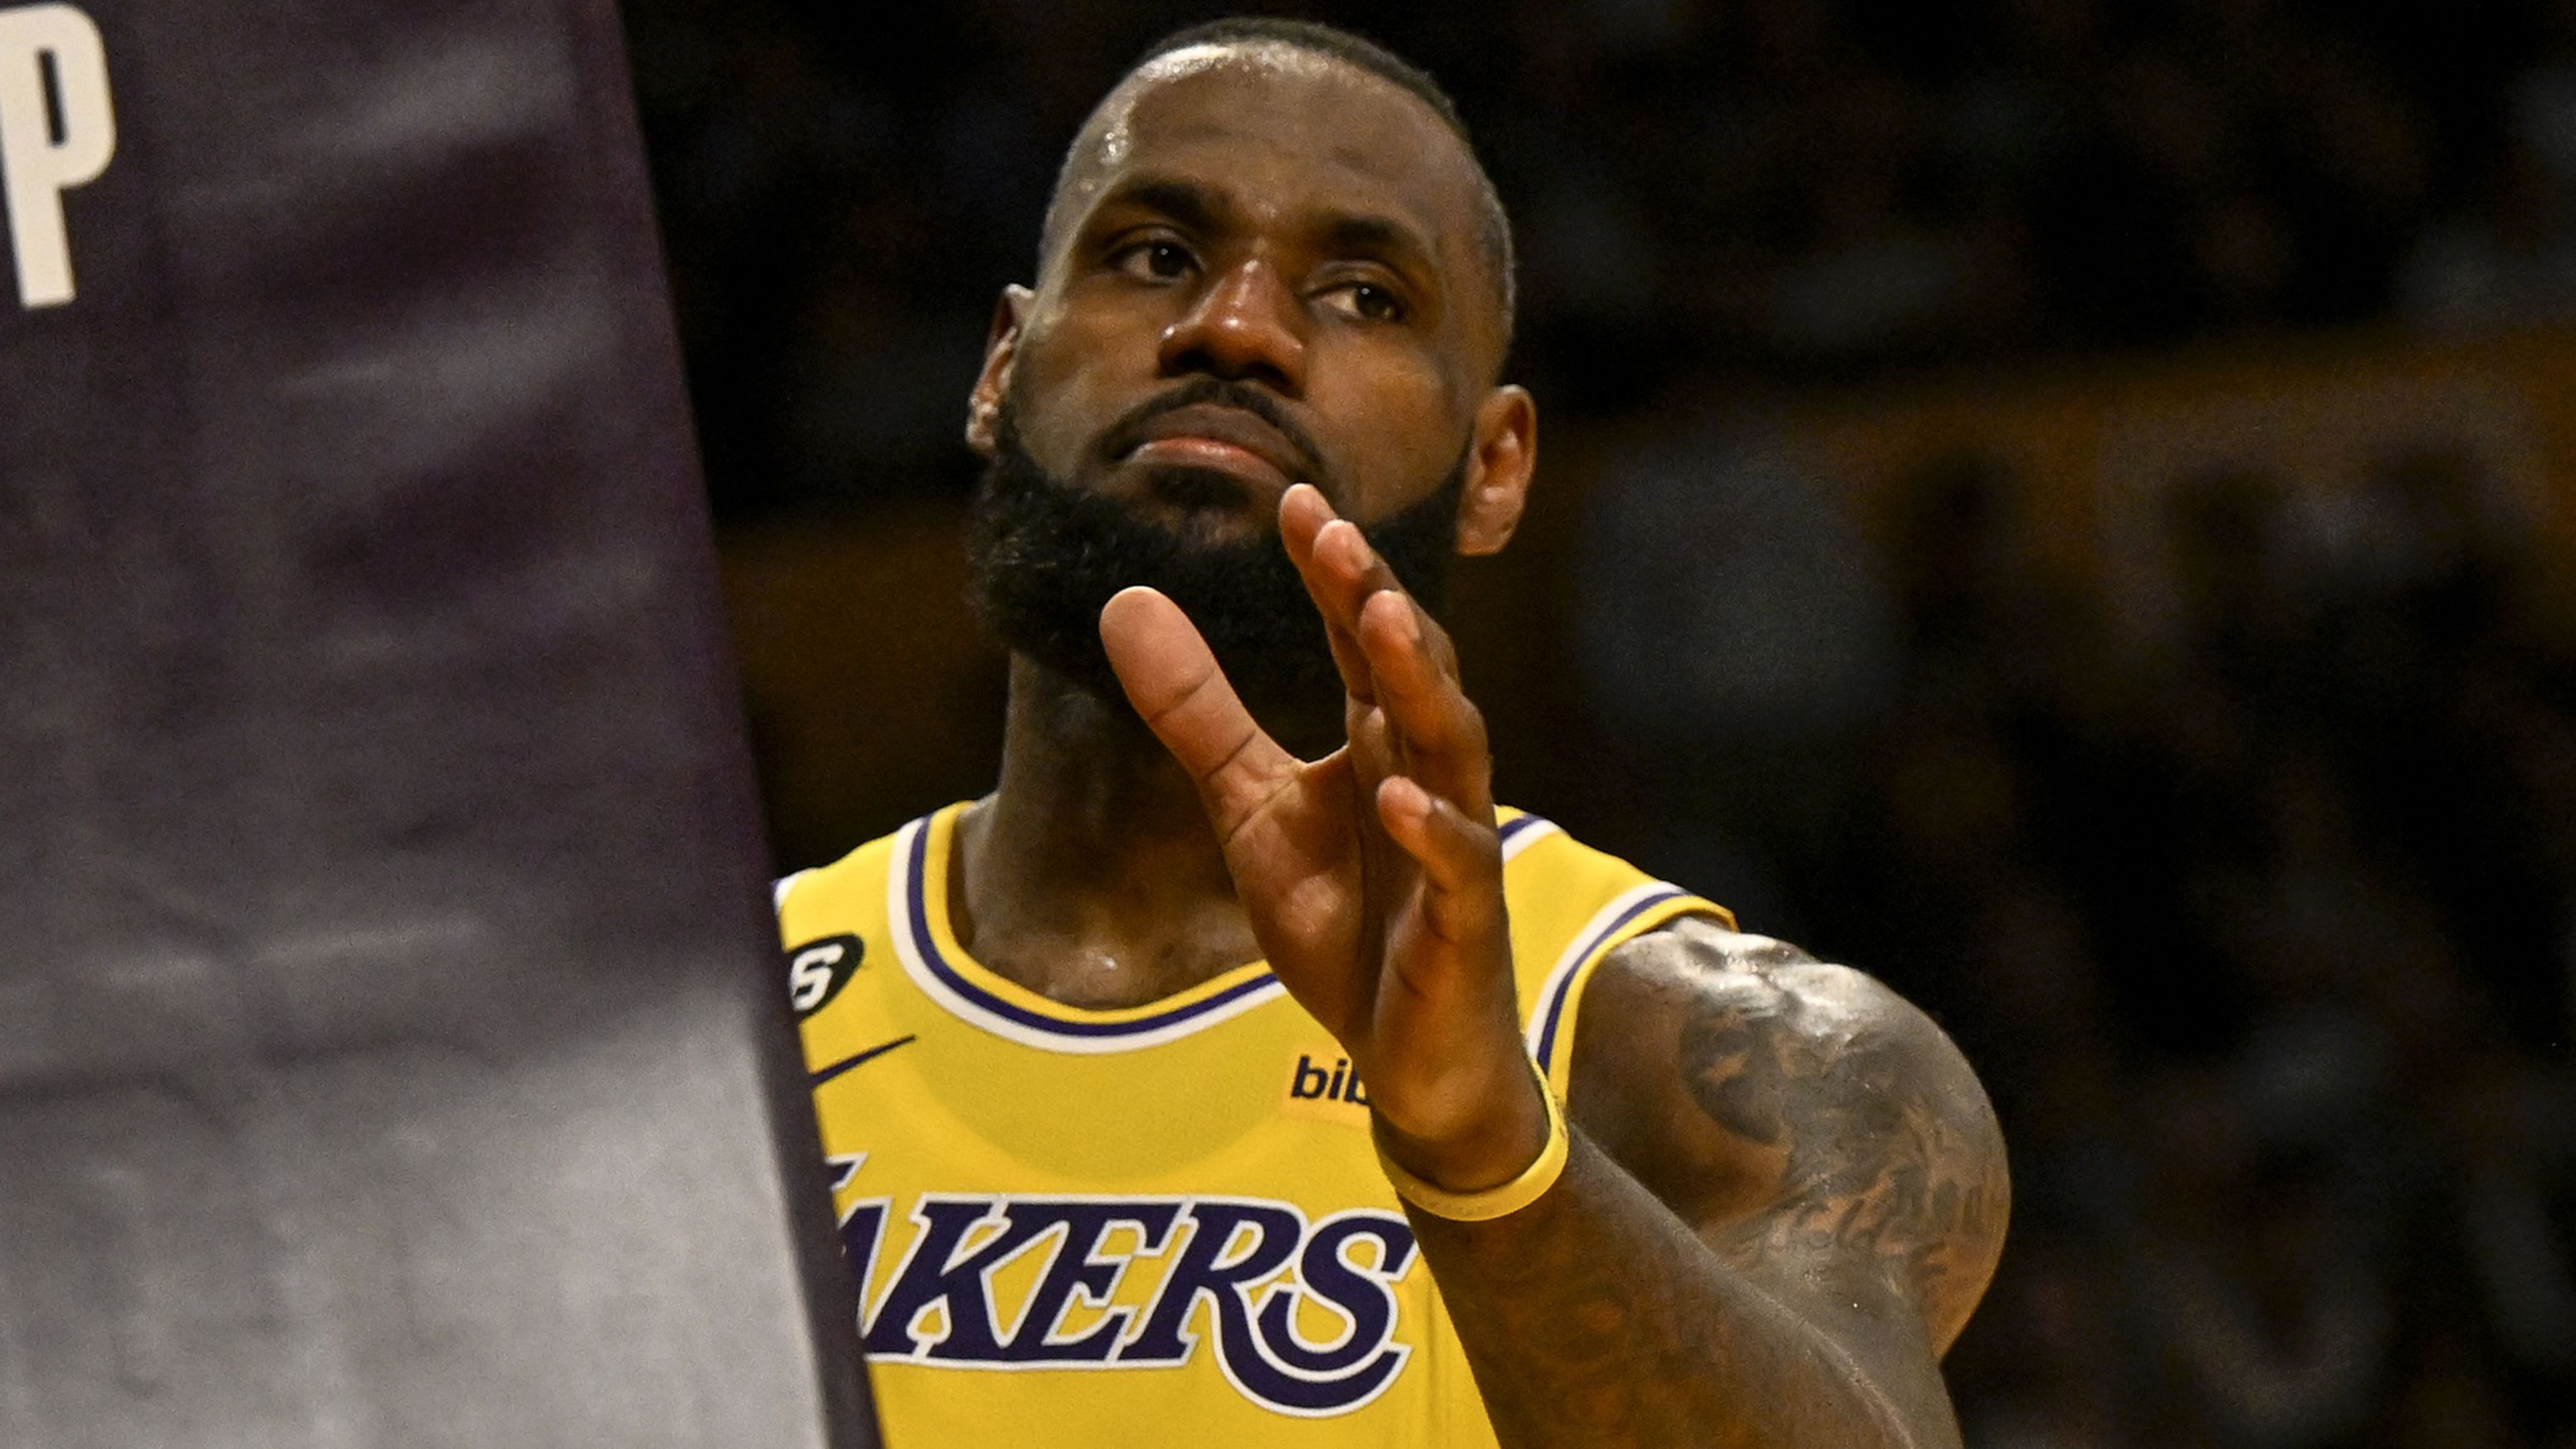 'A lot left': LeBron James confirms return for 2023-24 season after flirting with retirement